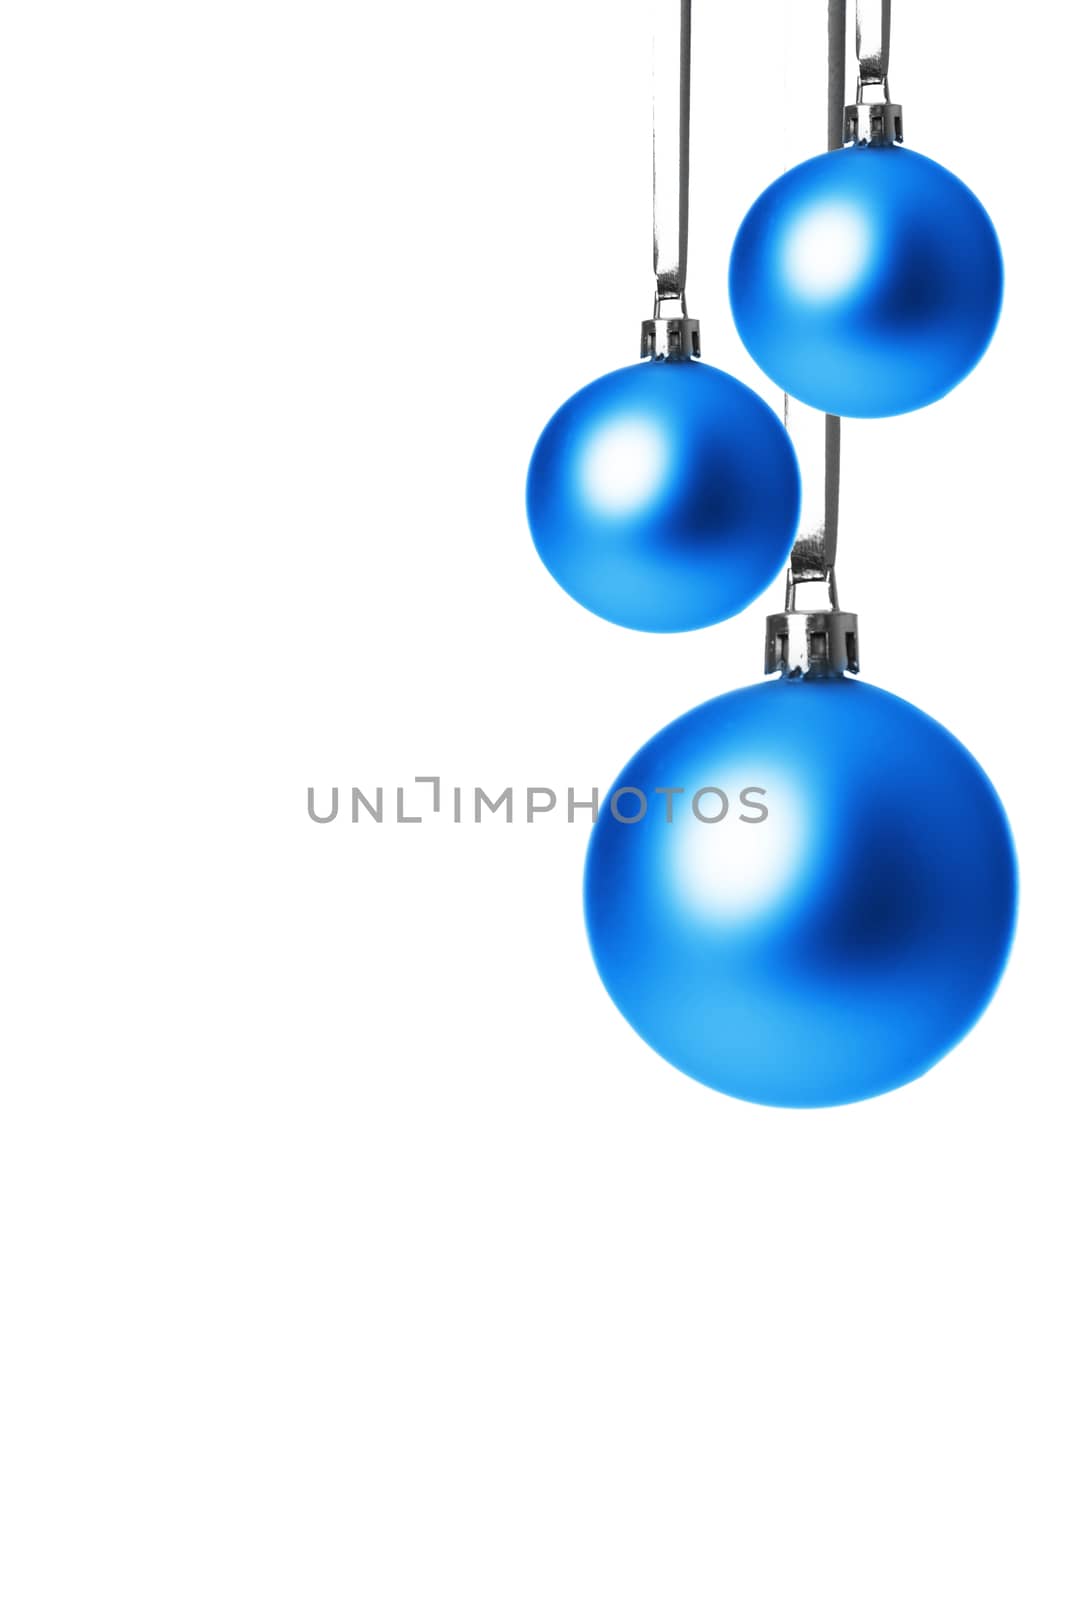 blue christmas balls isolated with white background 